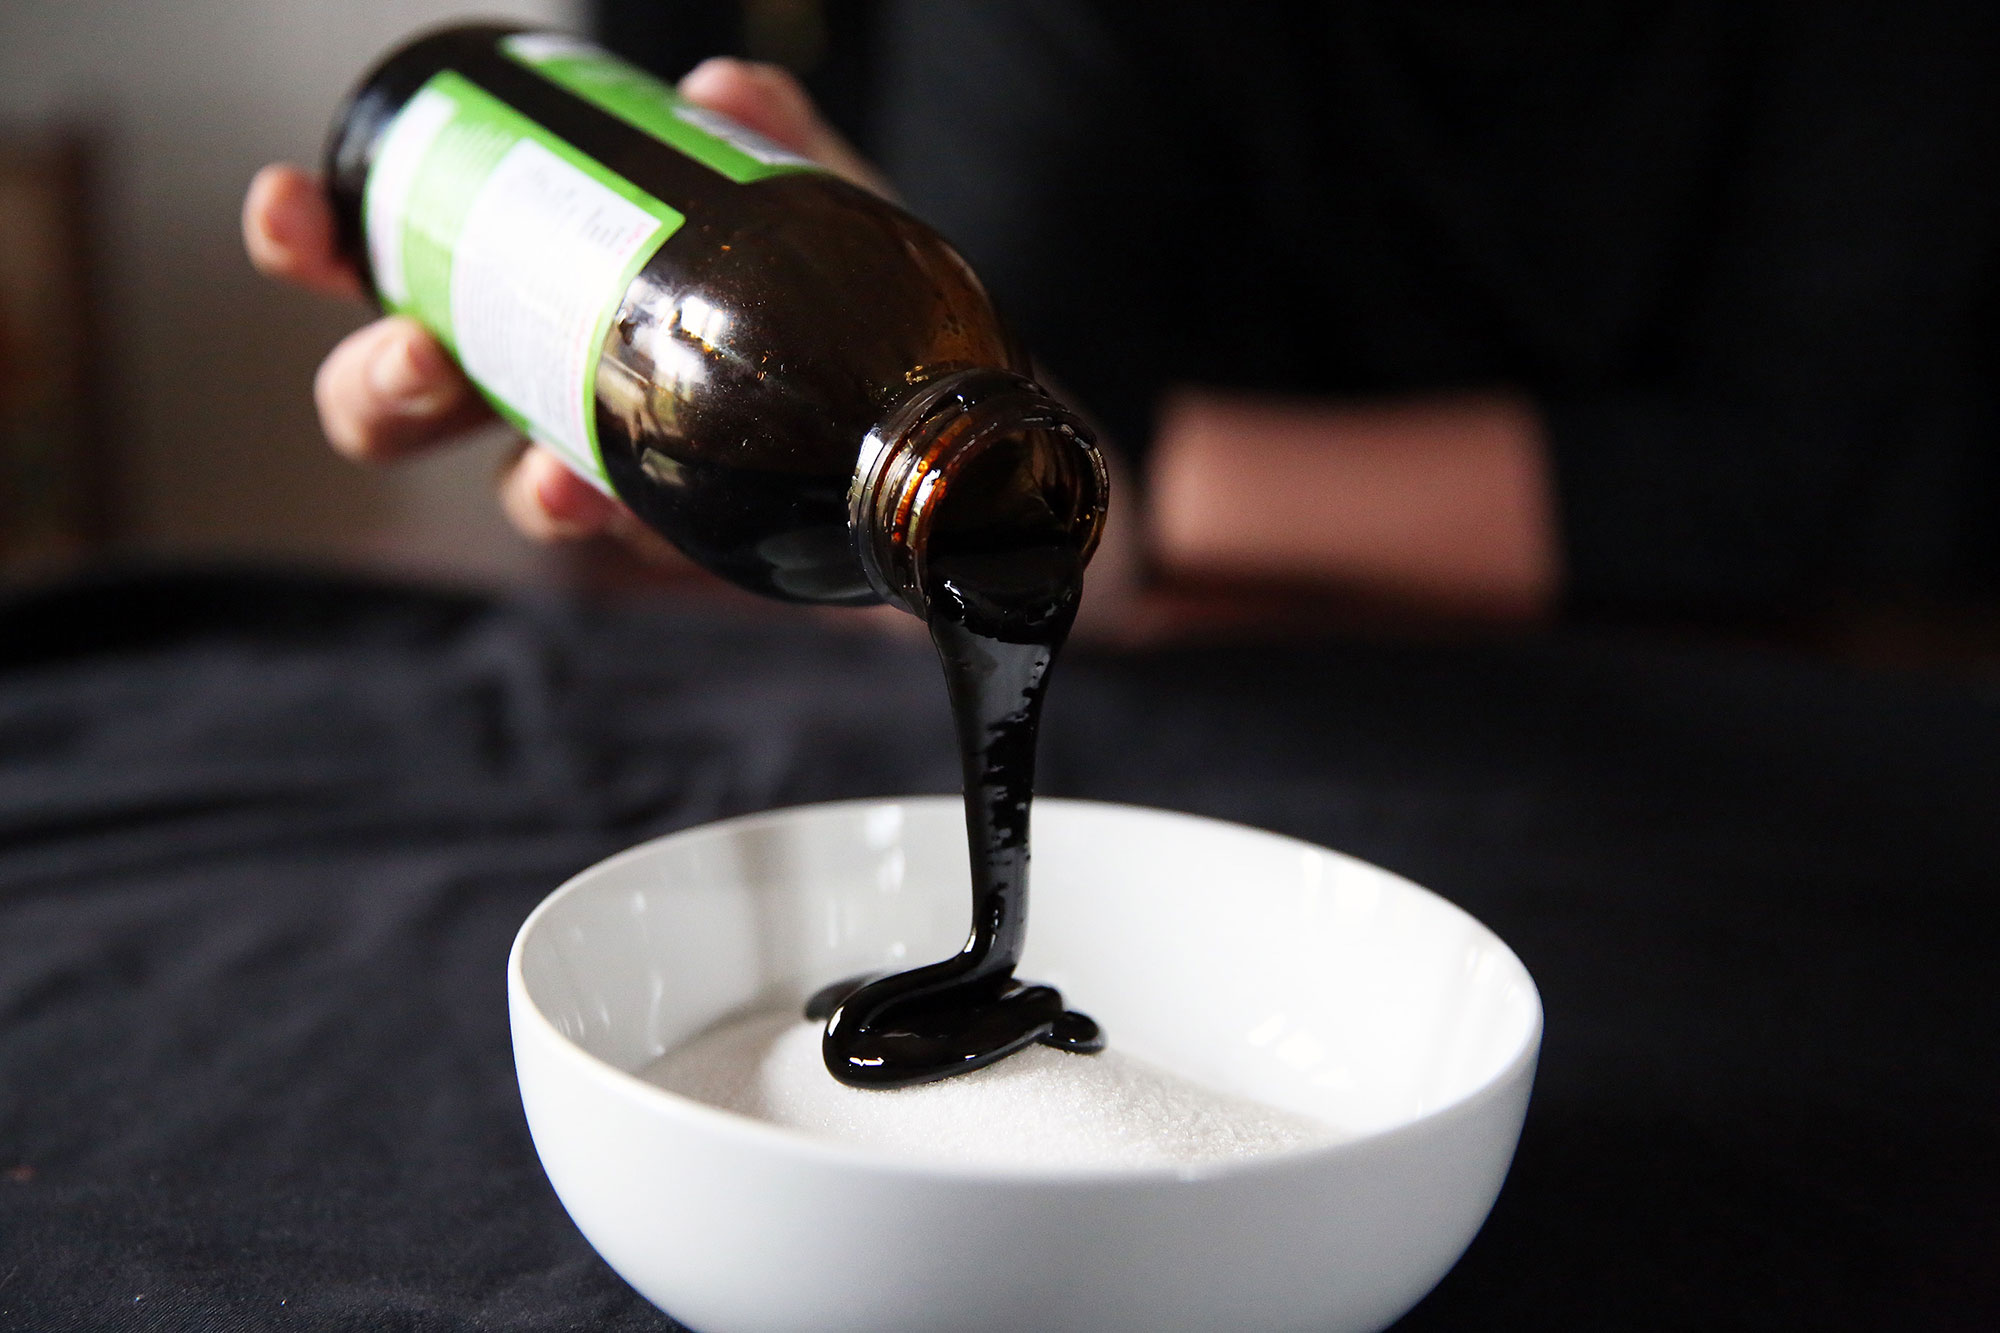 do not refrigerate - pouring molasses - >